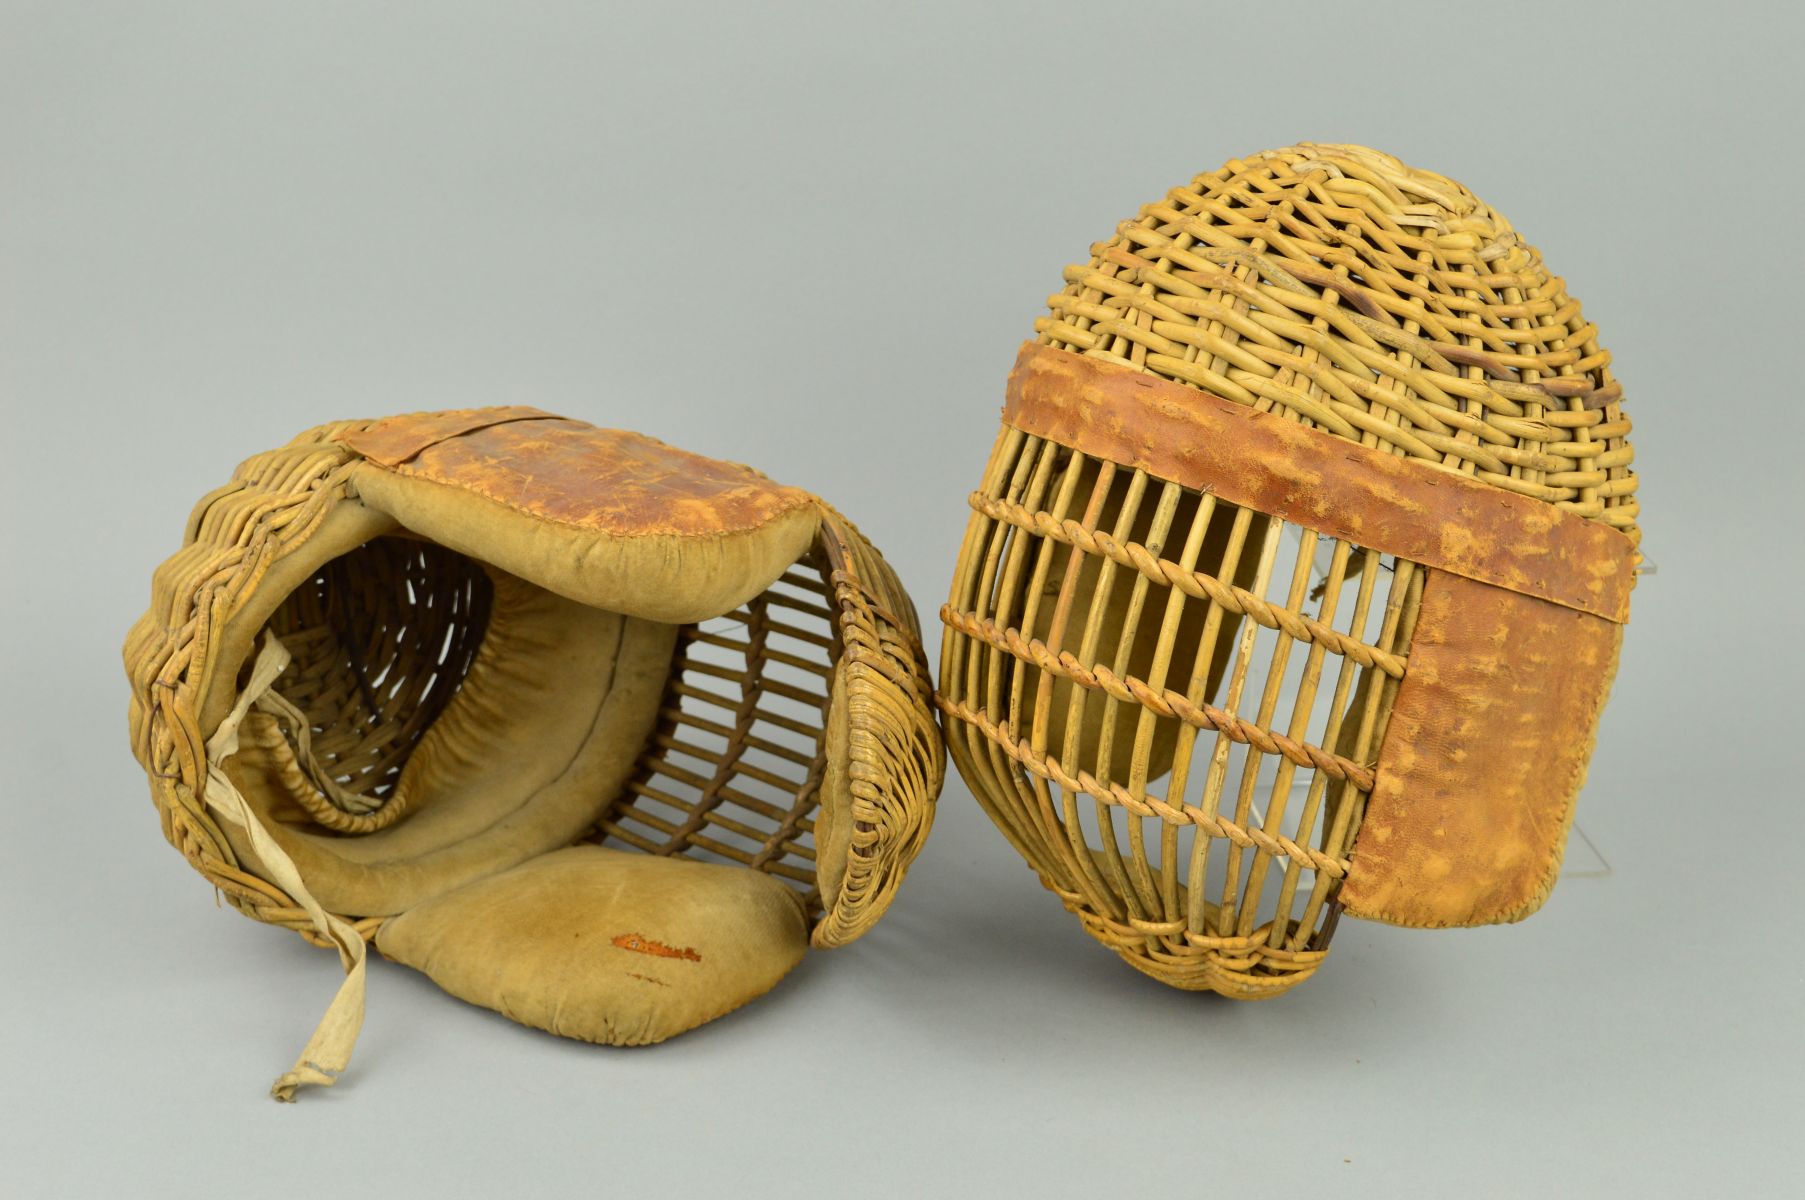 TWO LATE 19TH/EARLY 20TH CENTURY JAPANESE 'KENDO' FACEMASKS, constructed in wicker style, with - Image 2 of 4